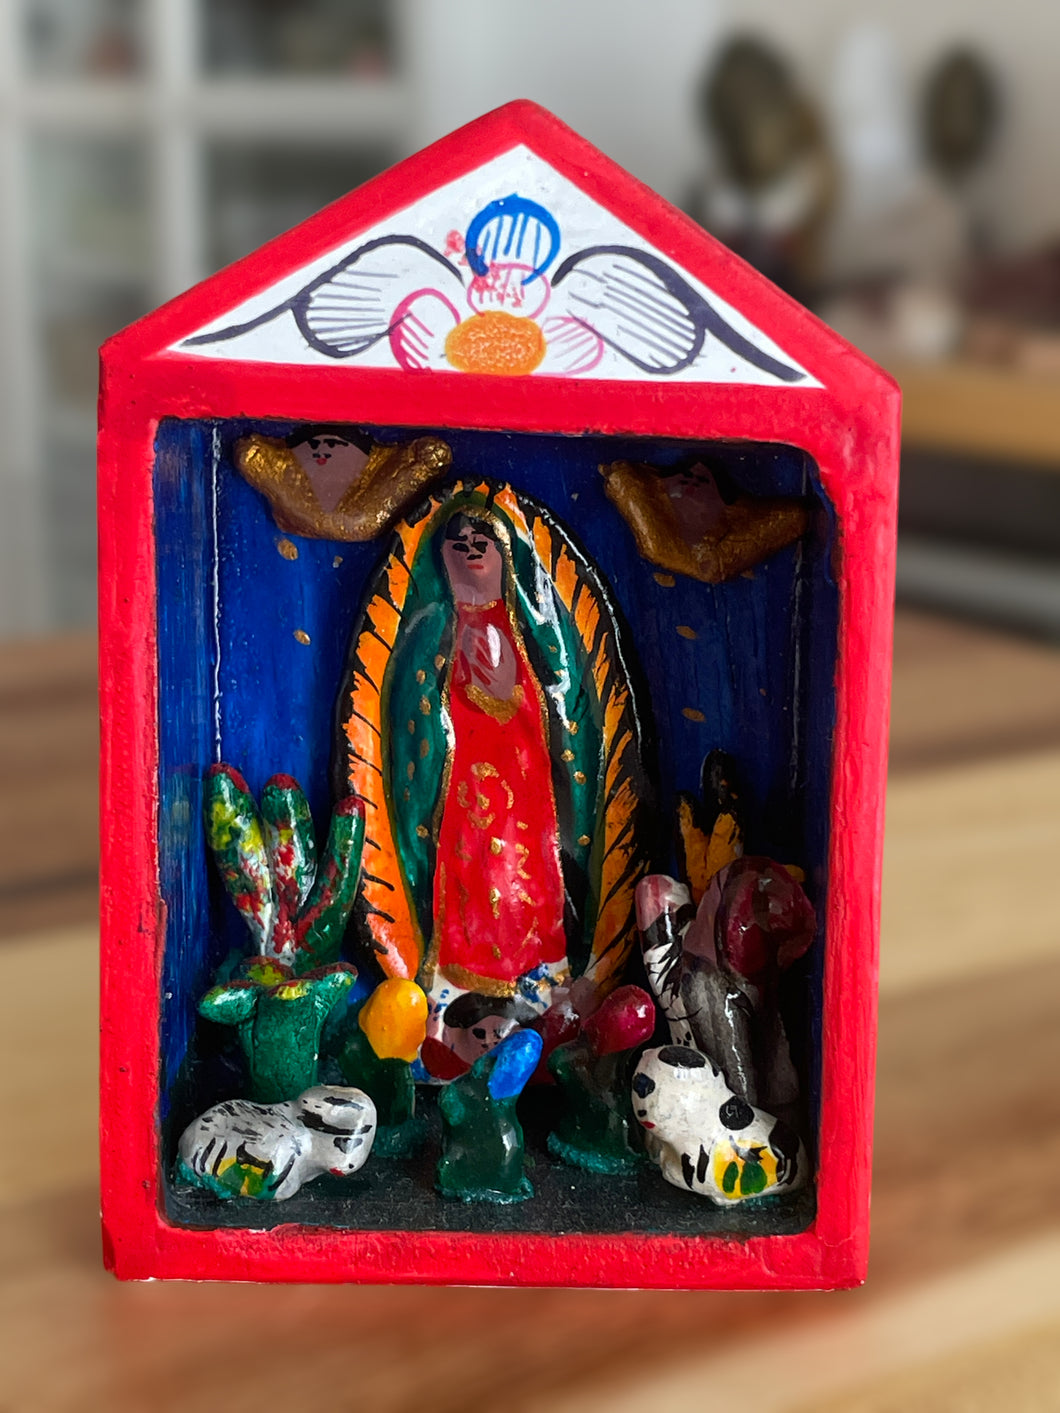 Hand crafted Our Lady of Guadalupe Mary mini altar by Peruvian artist ZF88